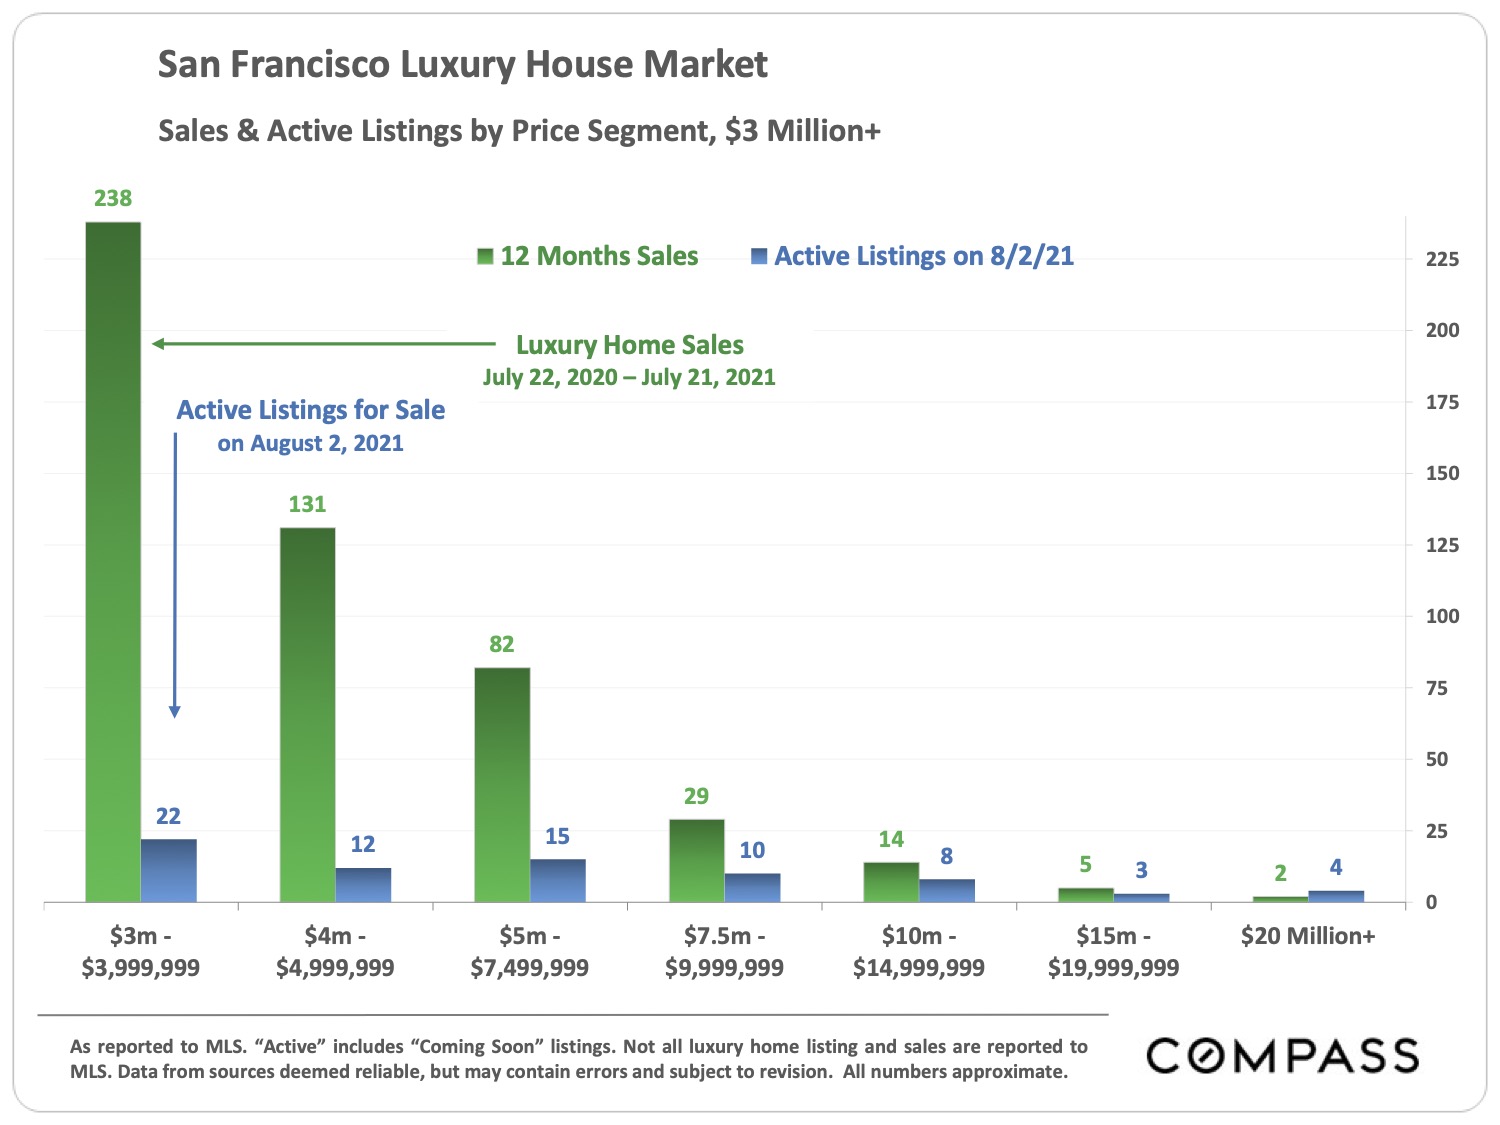 Image of San Francisco Luxury House Market Sales & Active Listings by Price Segment $3 Million+